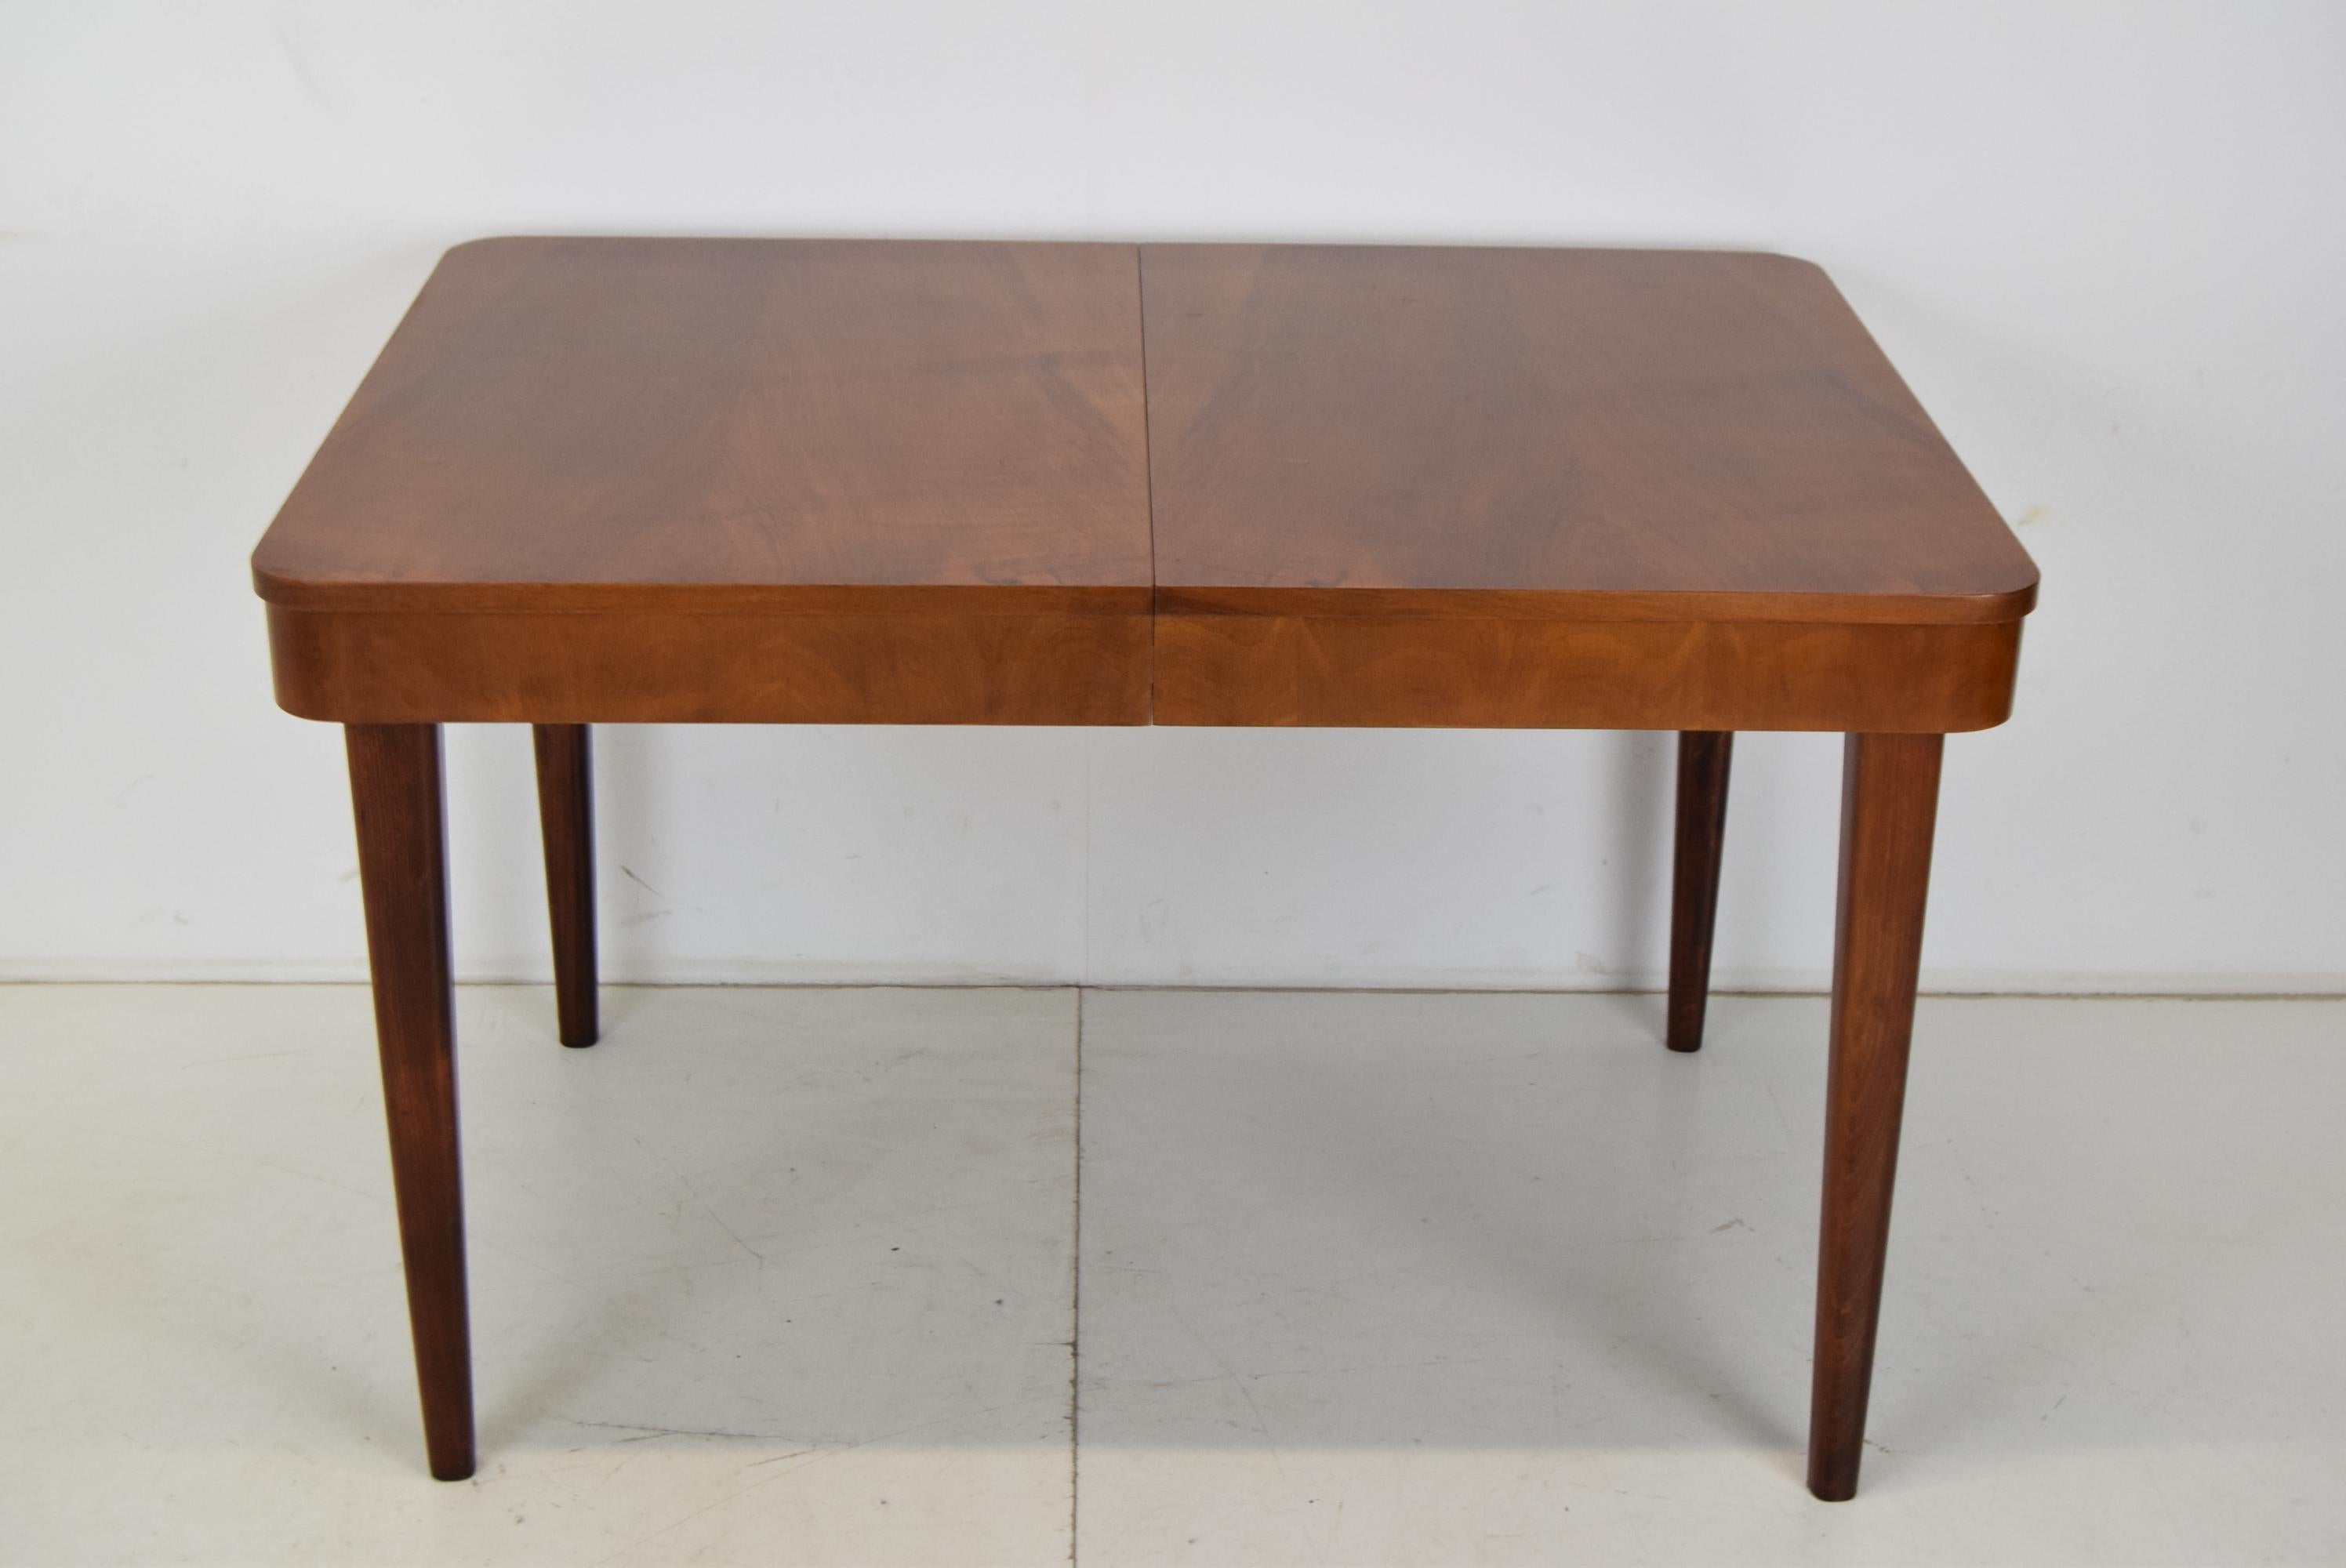 Czech Art Deco Extendable Dining Table, Designed by Jindrich Halabala, 1940's For Sale